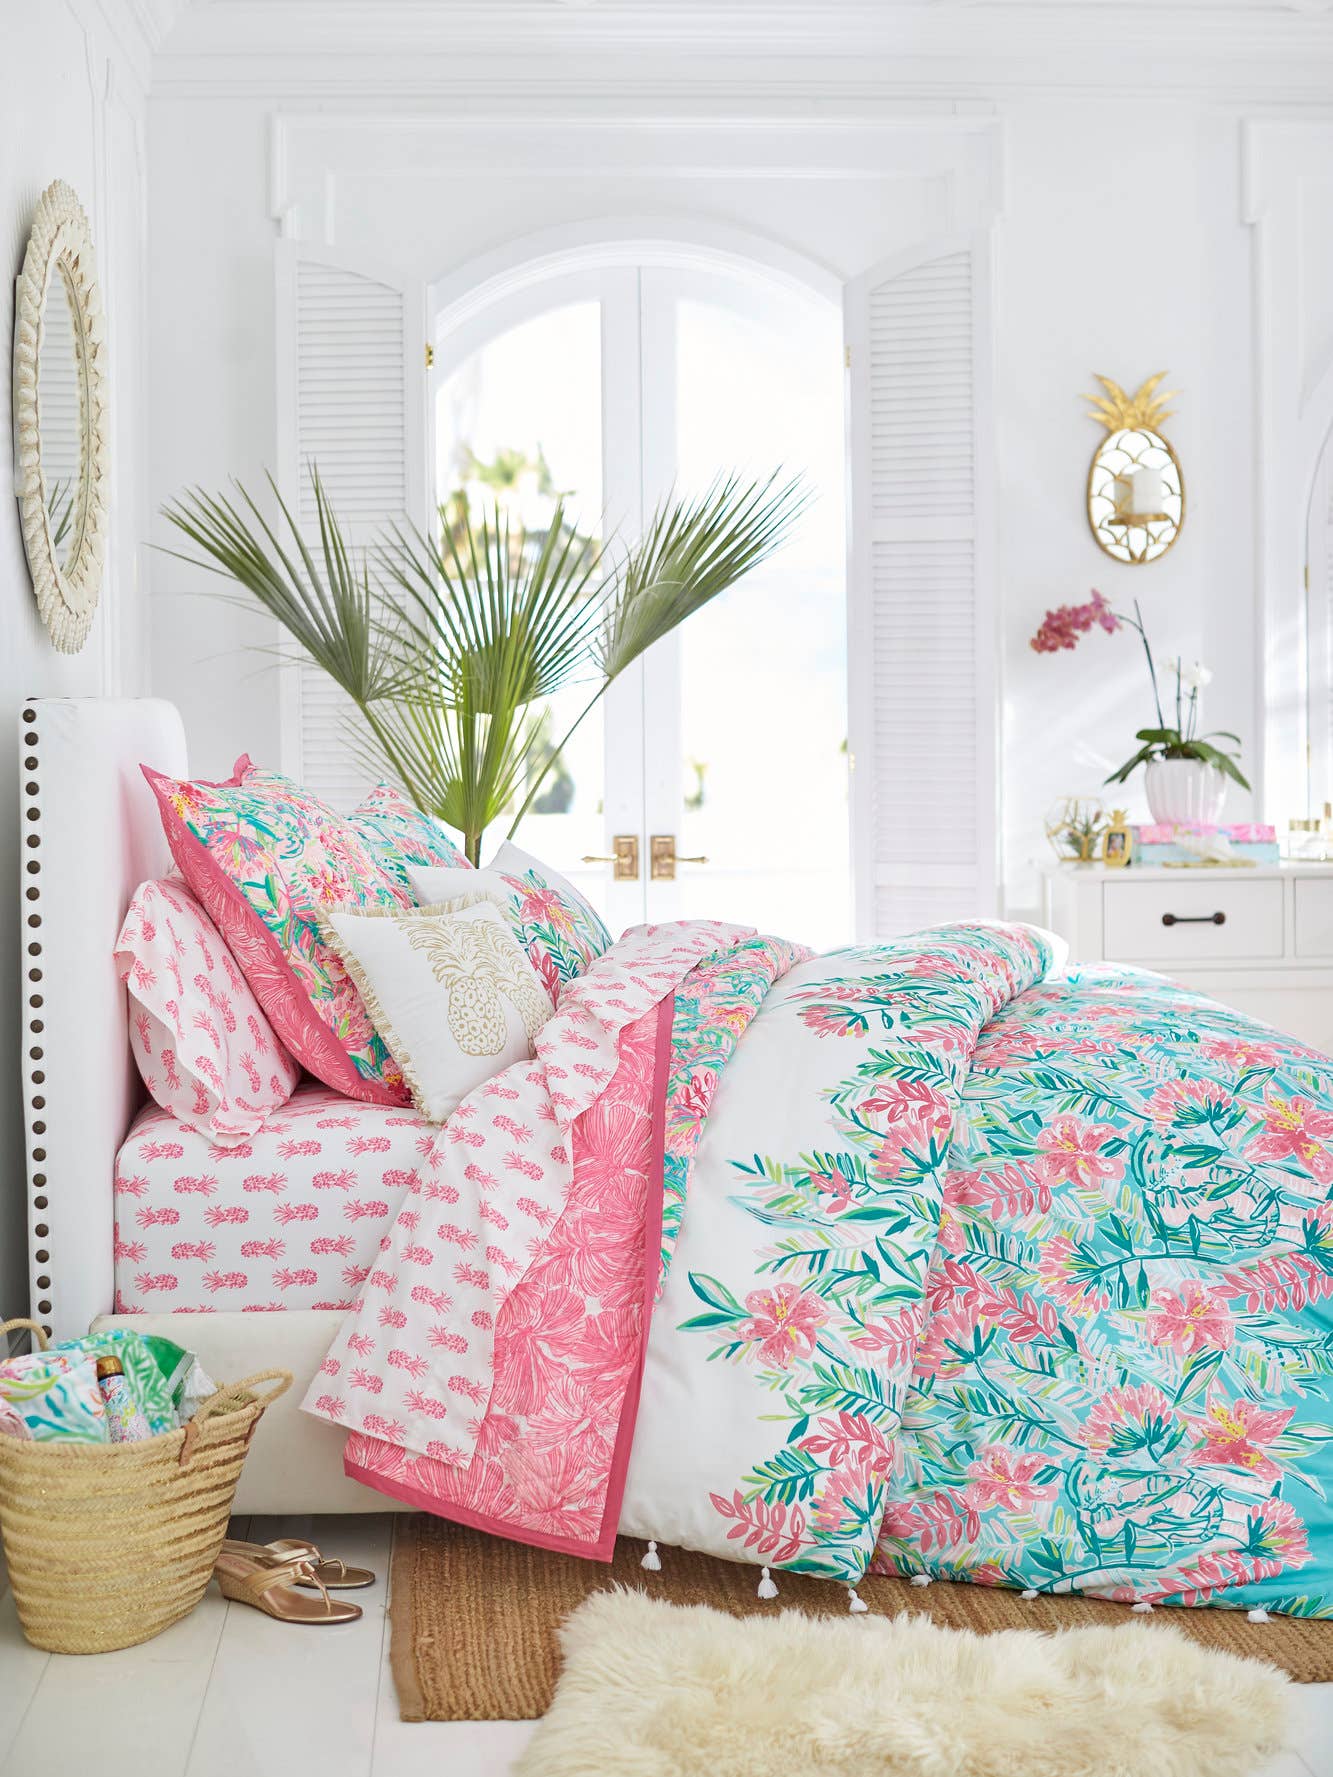 Pottery Barn x Lilly Pulitzer Just Dropped a New Collection